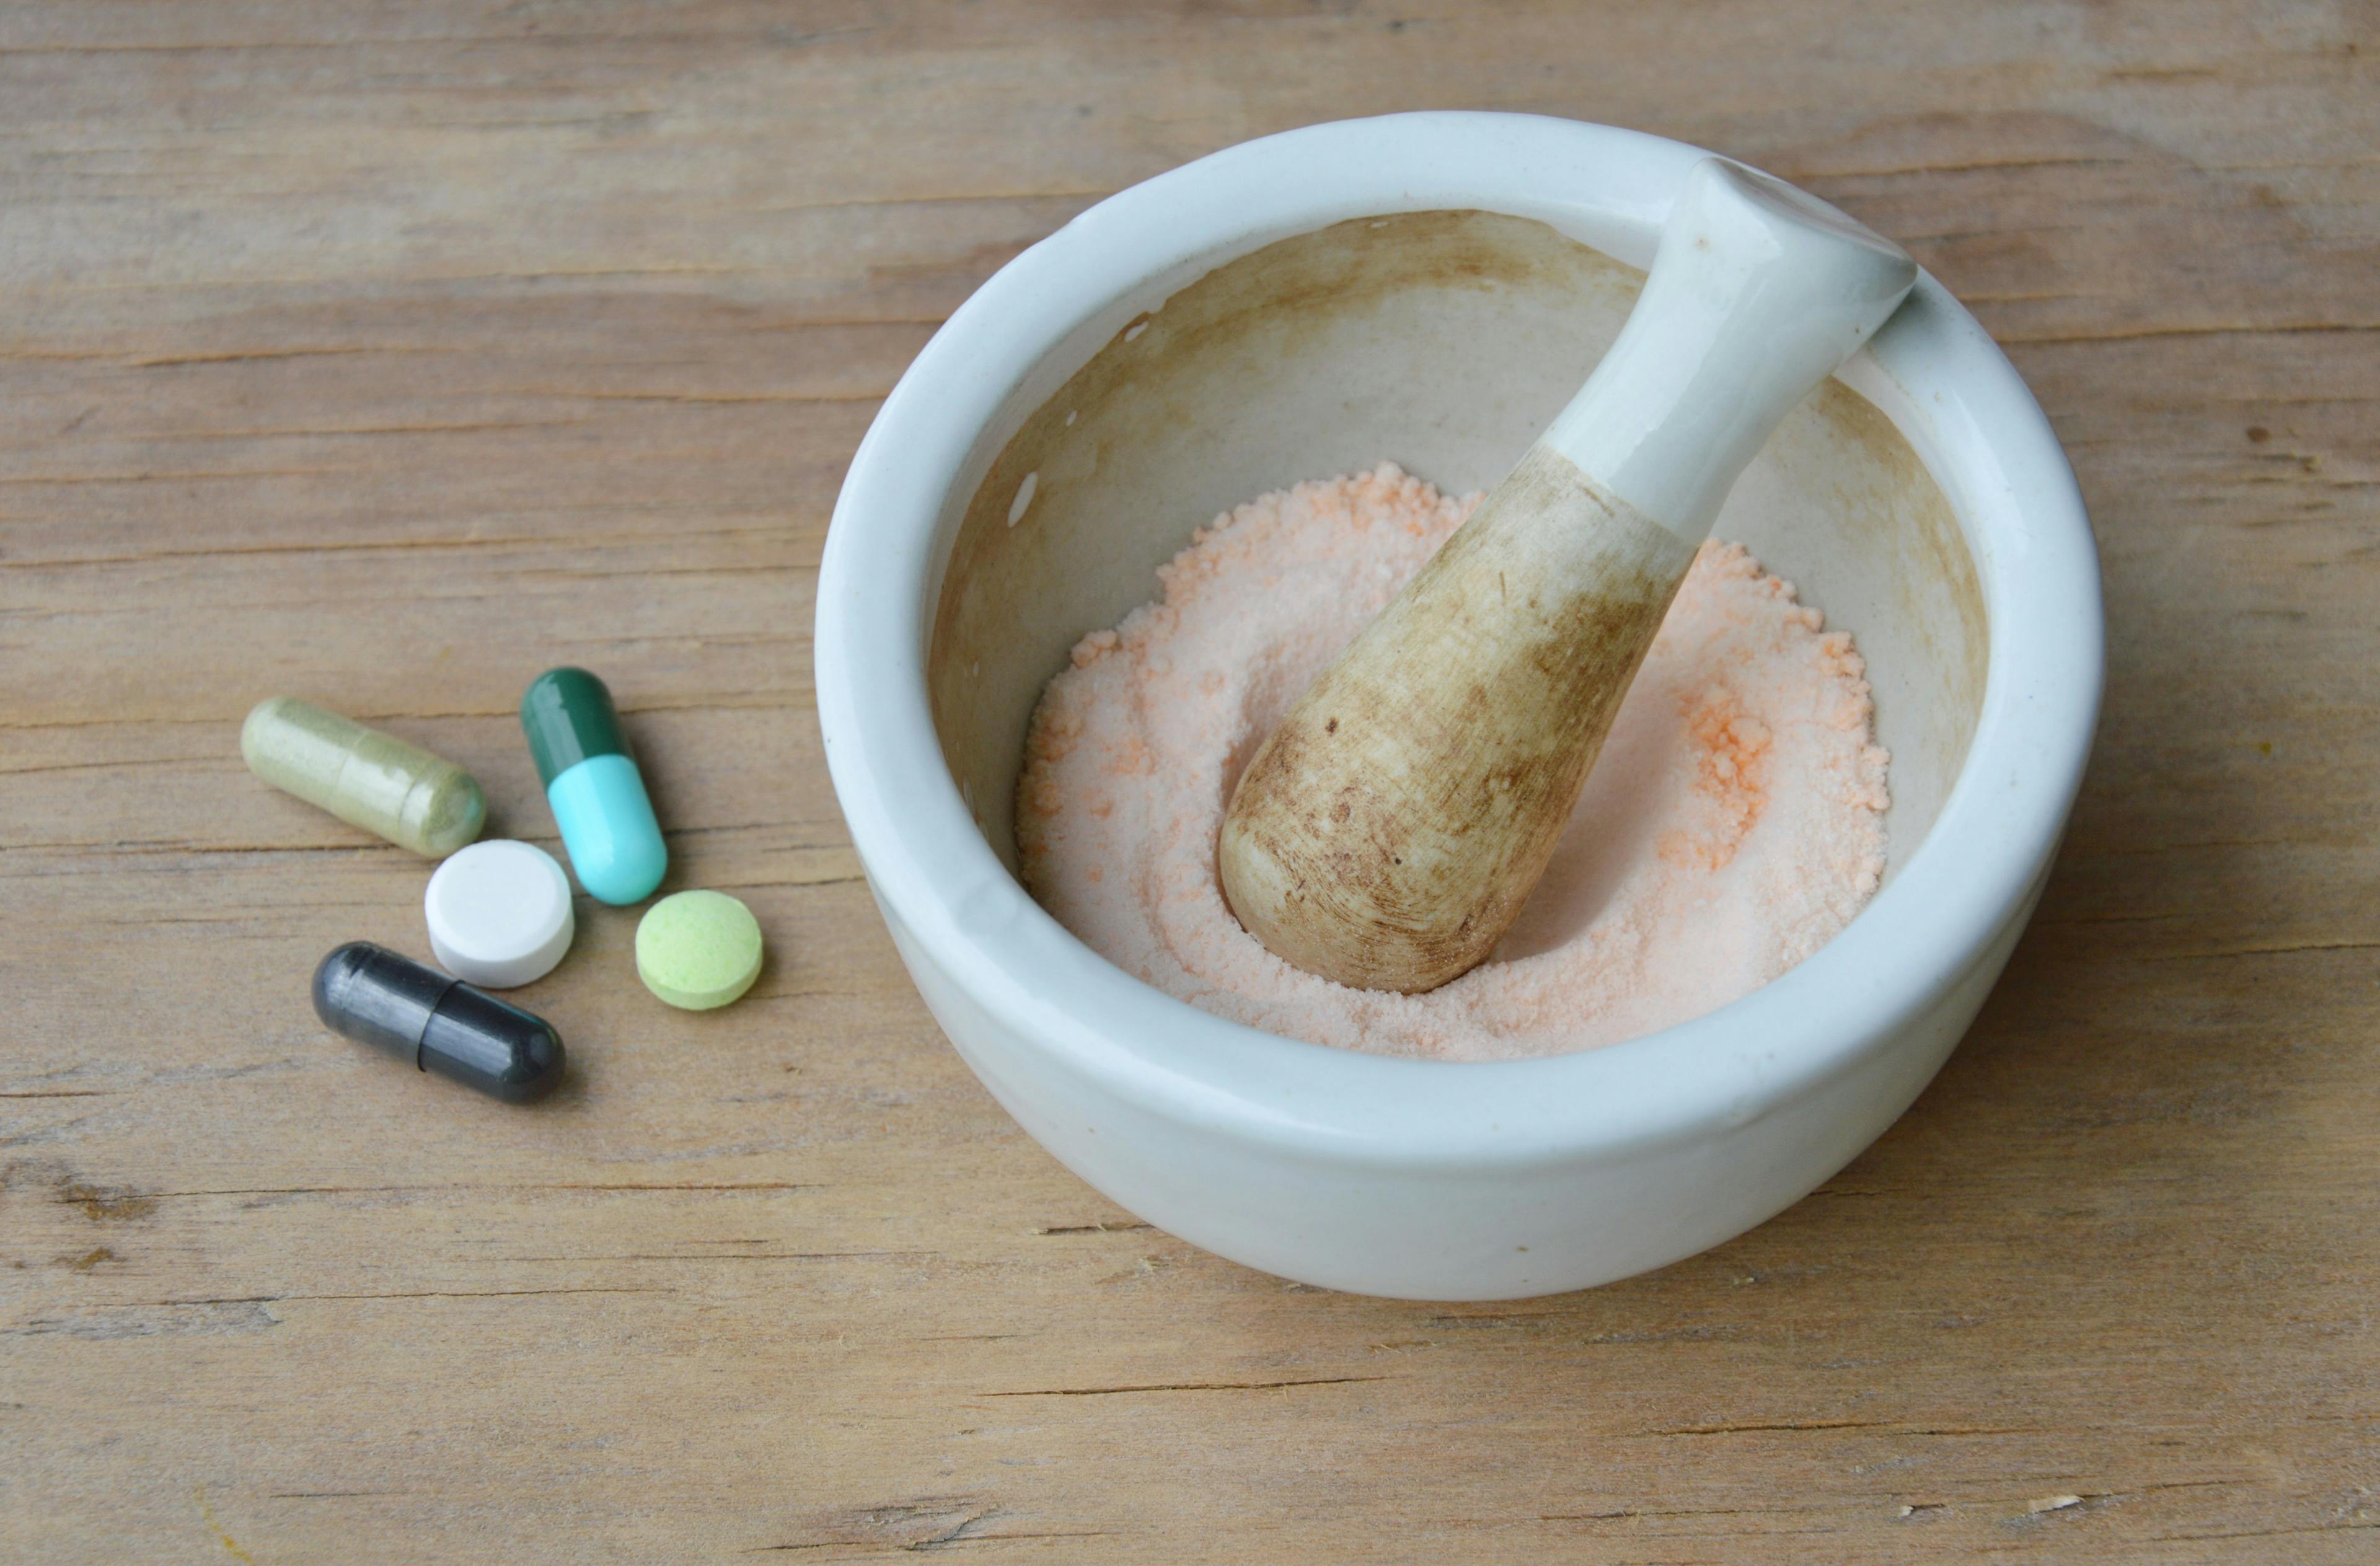 mortar and pestle for crushed pill on wooden board